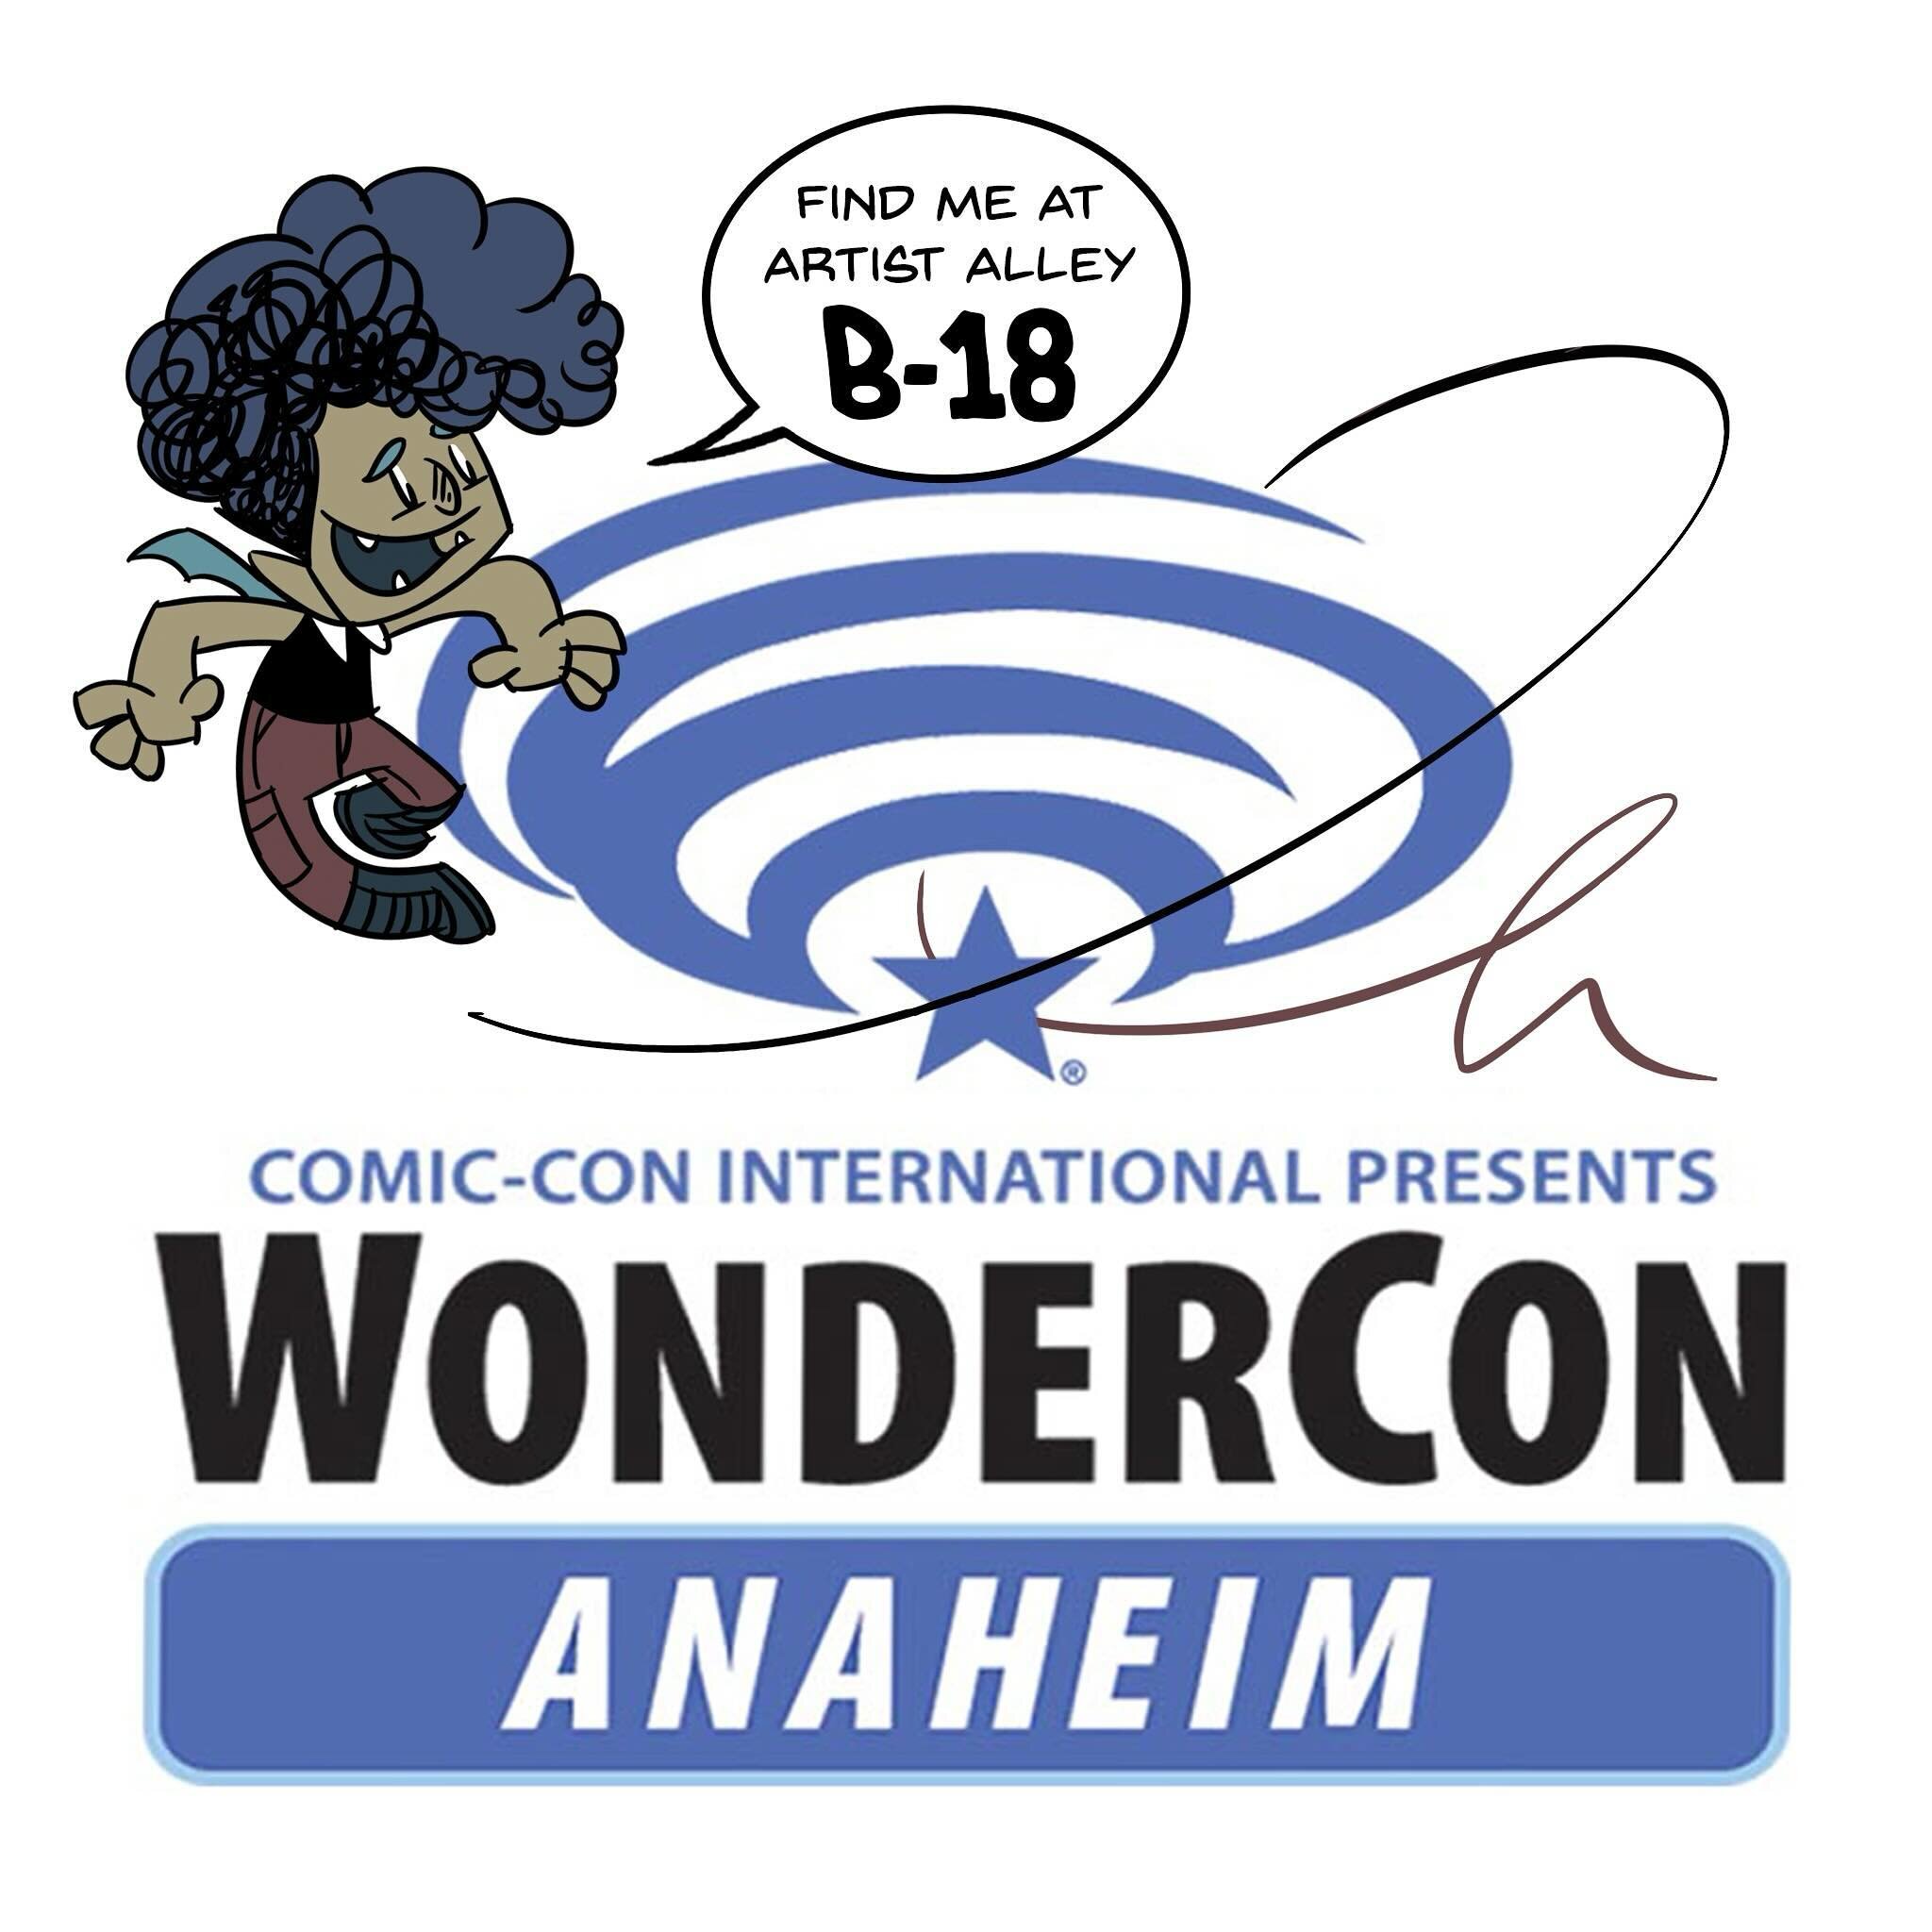 Only a few short days before @wondercon kicks off. I am very excited to be making my return and I can&rsquo;t wait to connect with everyone out on there con floor. Find me in Artist Alley, B-18. 

#wondercon #wonderconanaheim #comicconvention #anahei